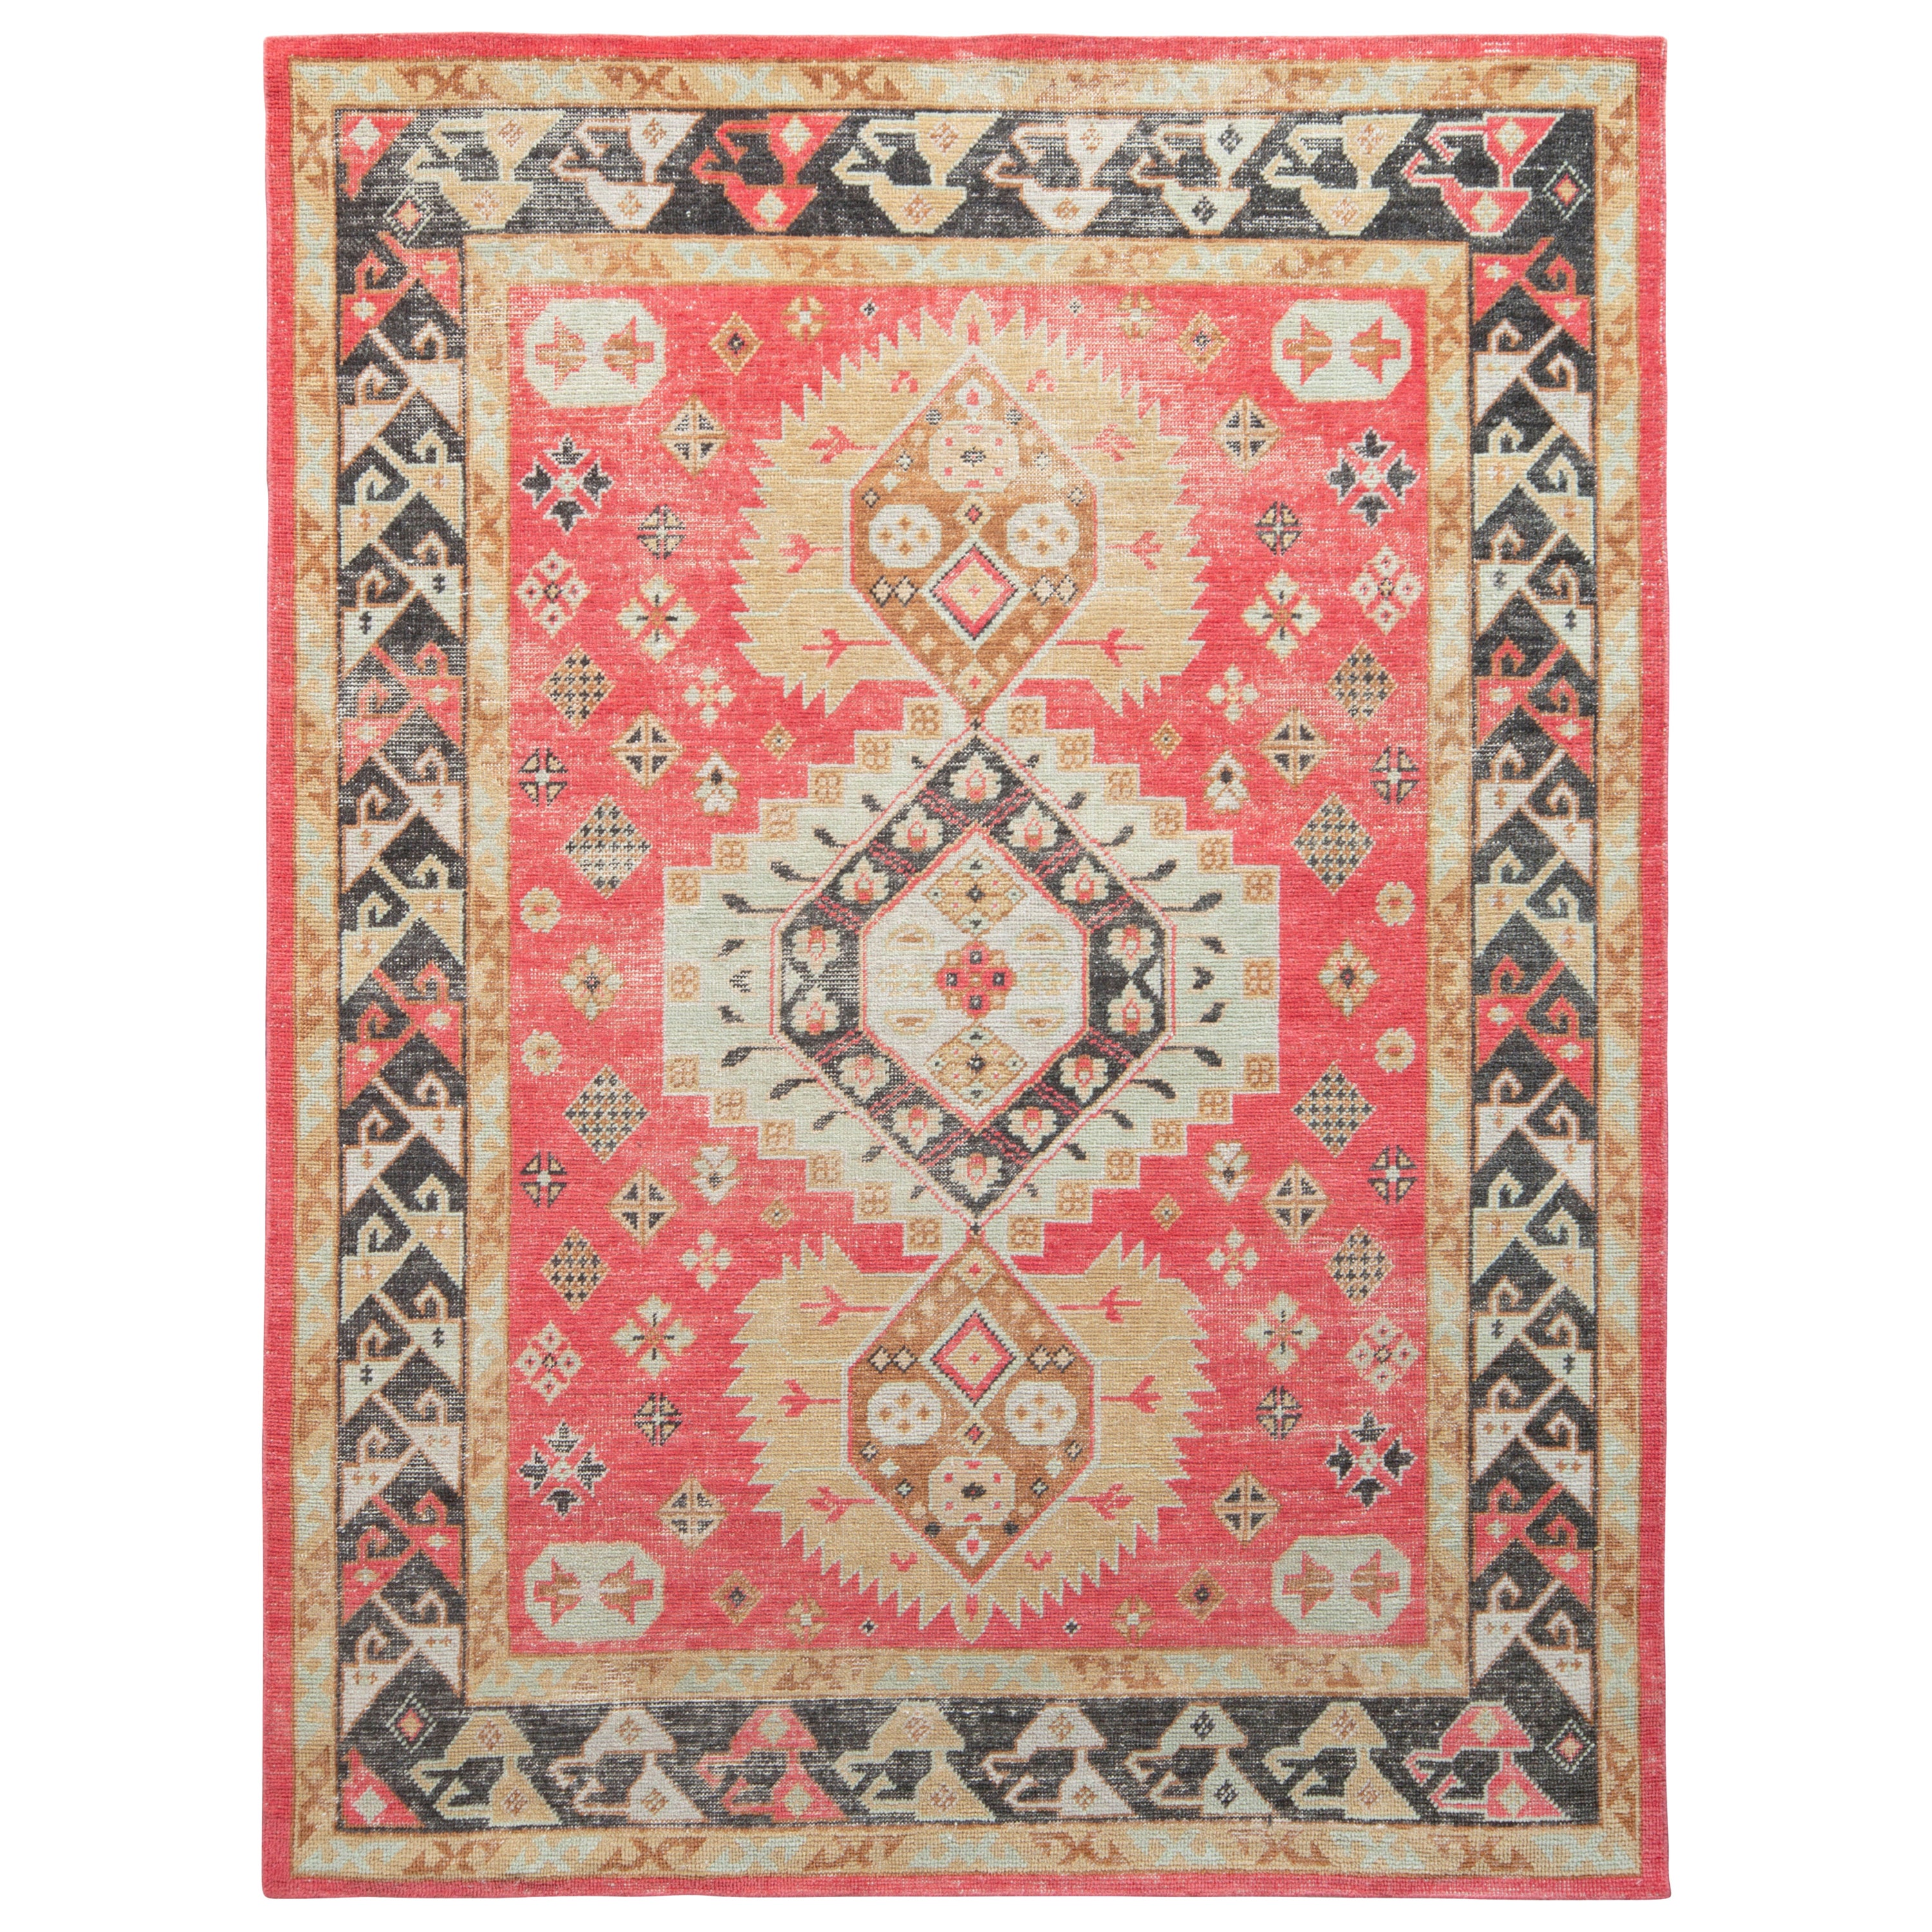 Rug & Kilim's Distressed Classic Style Teppich in Rot, Beige-Braun Medaillon-Muster im Angebot